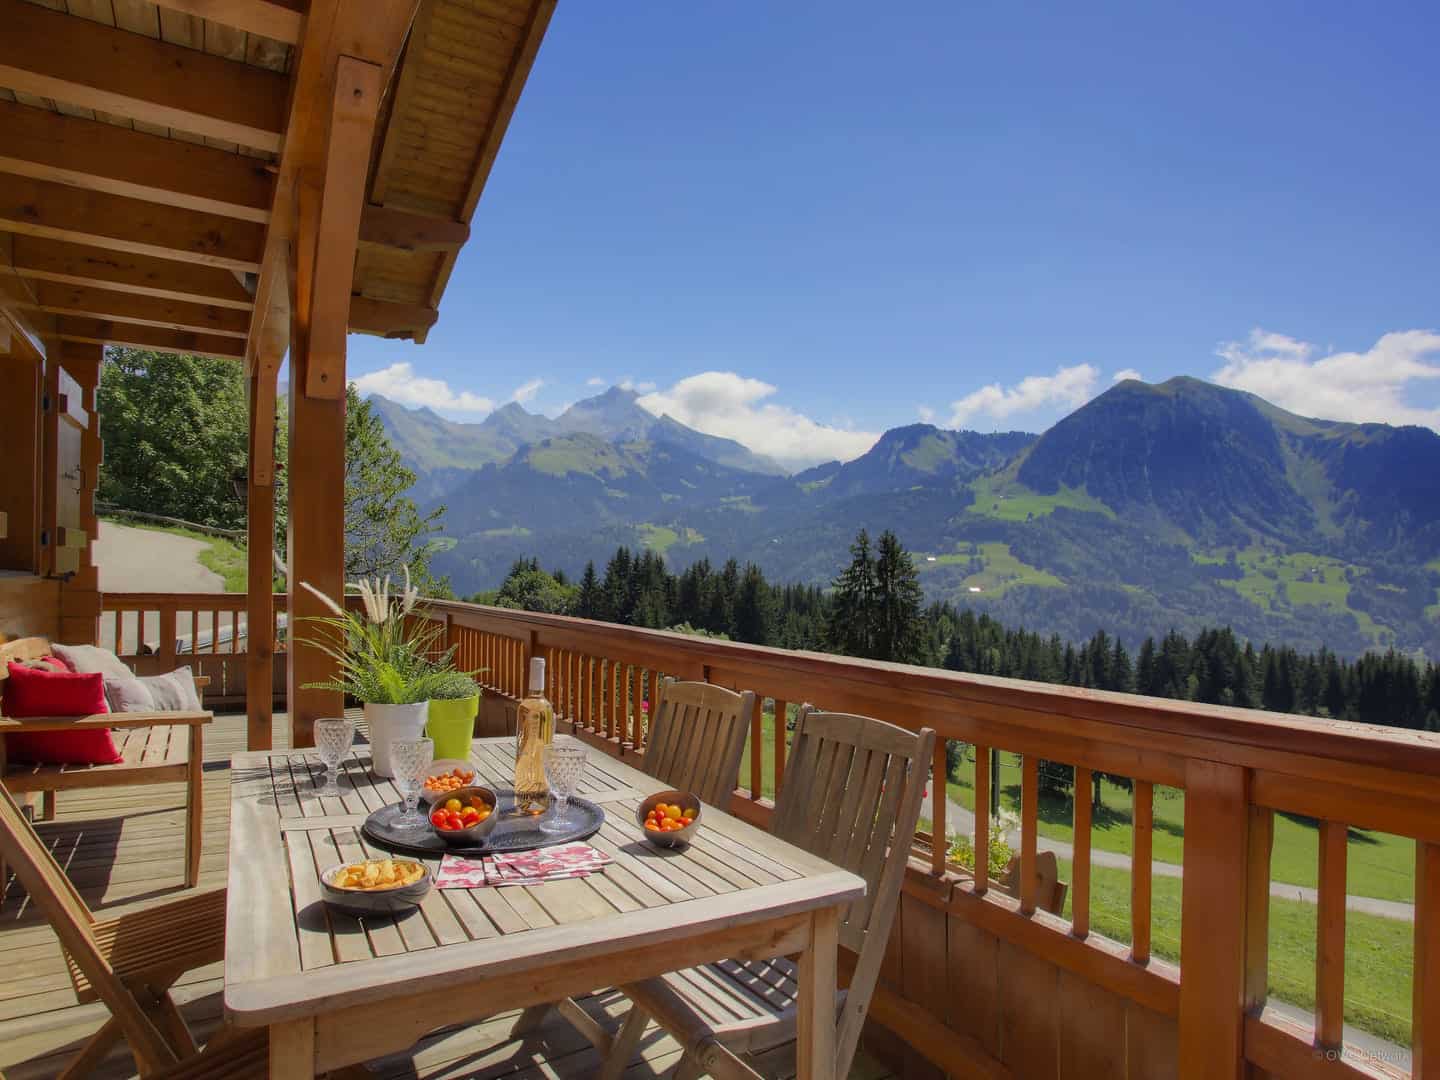 The beautiful views from the dining table on the balcony at Chalet Tekoa.